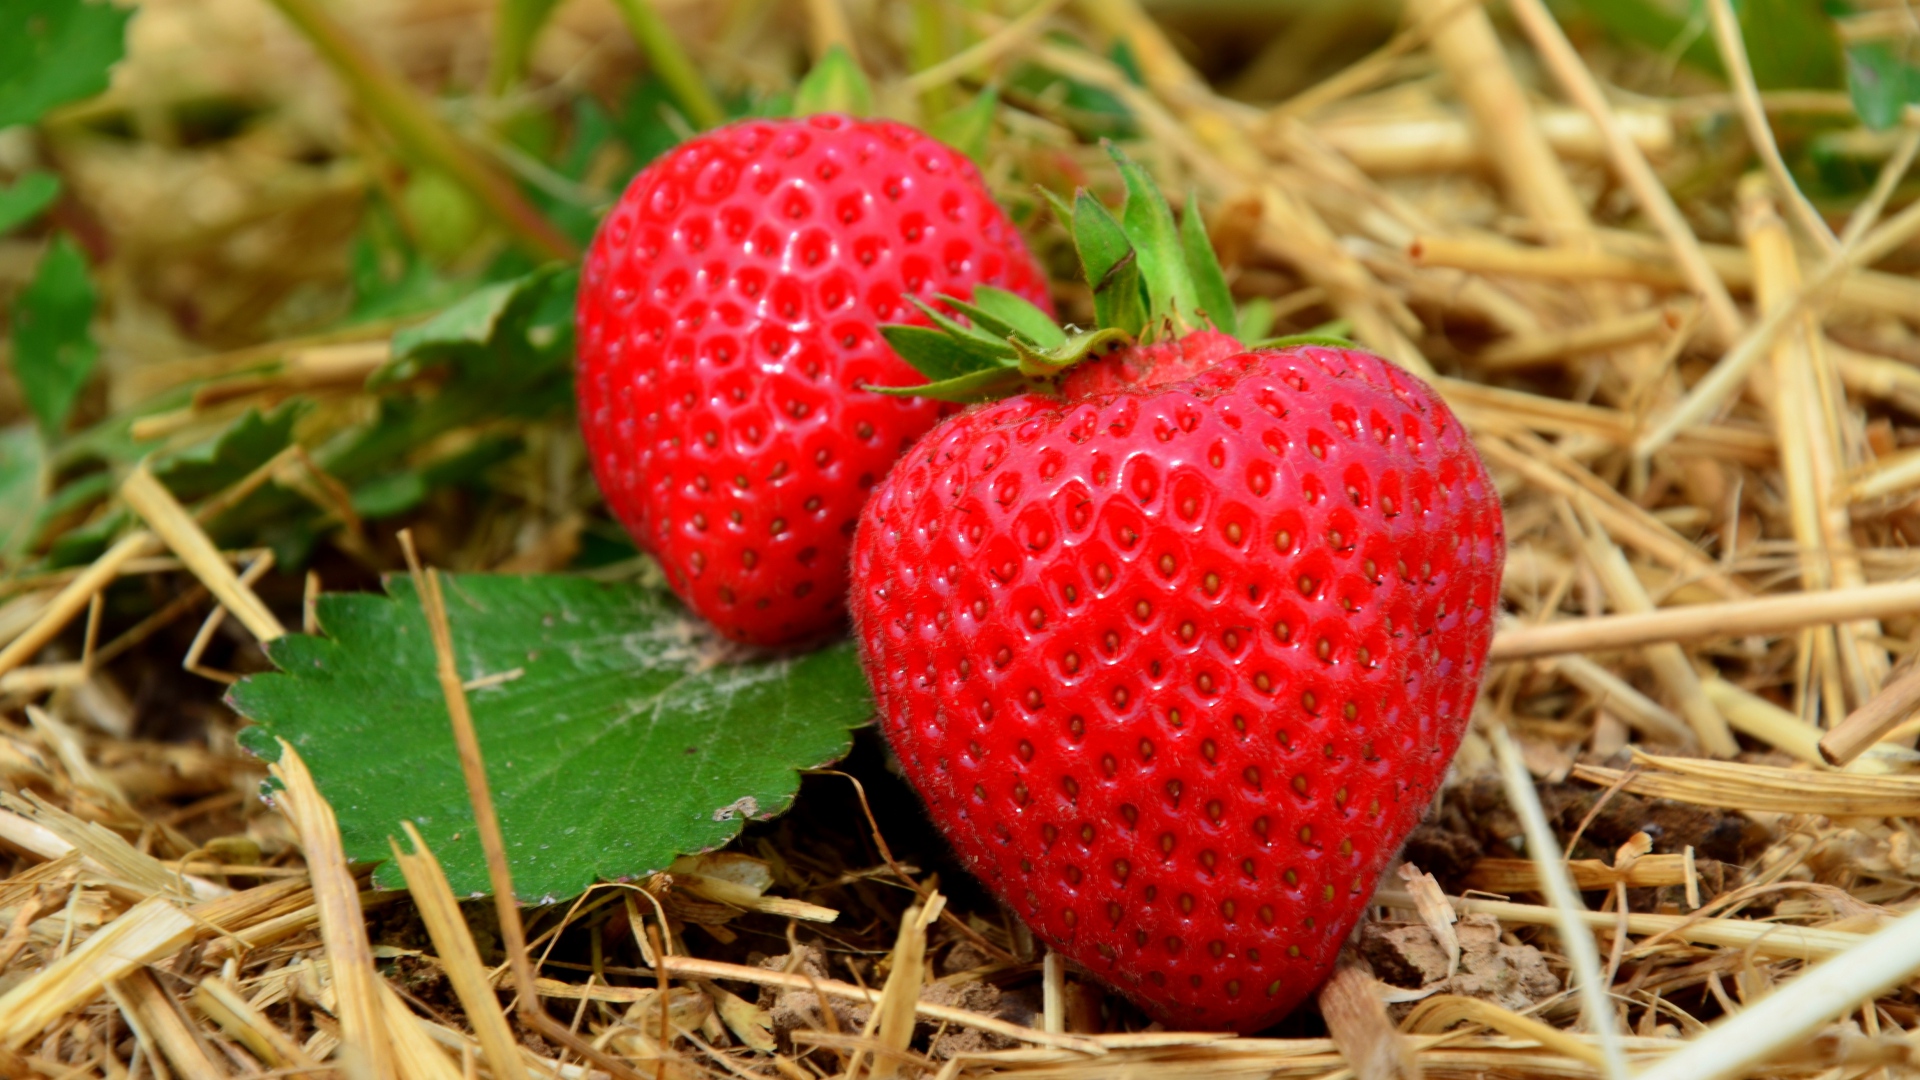 Wallpaper Strawberry Grass Close-up - Asexual And Sexual Reproduction In Strawberry Plants - HD Wallpaper 